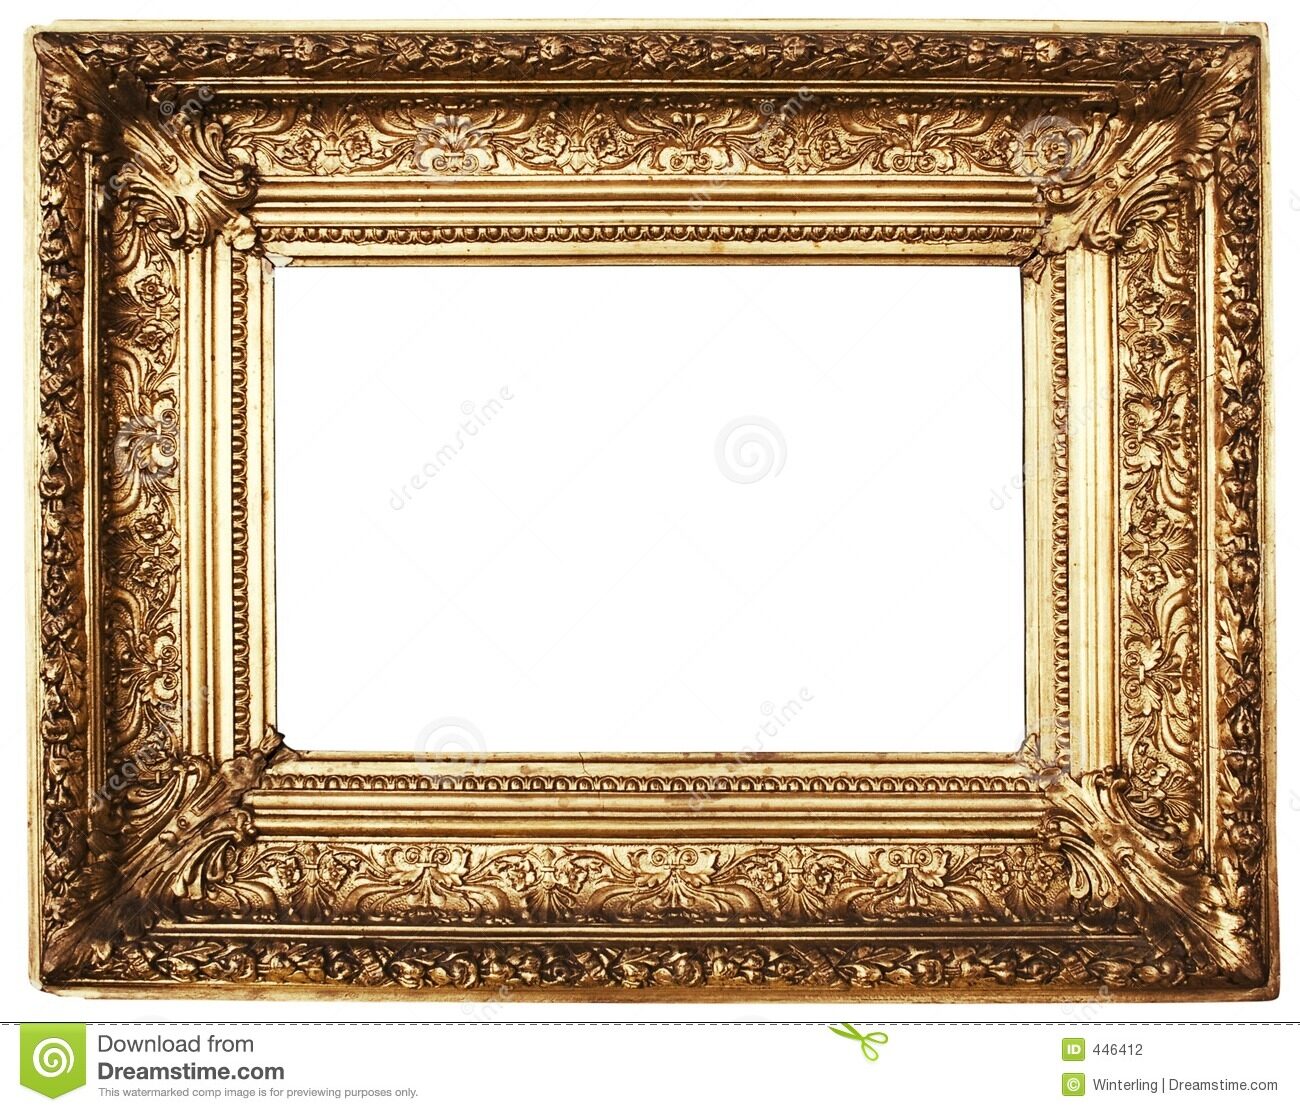 ornamented-picture-frame-gold-path-included-446412-8234553